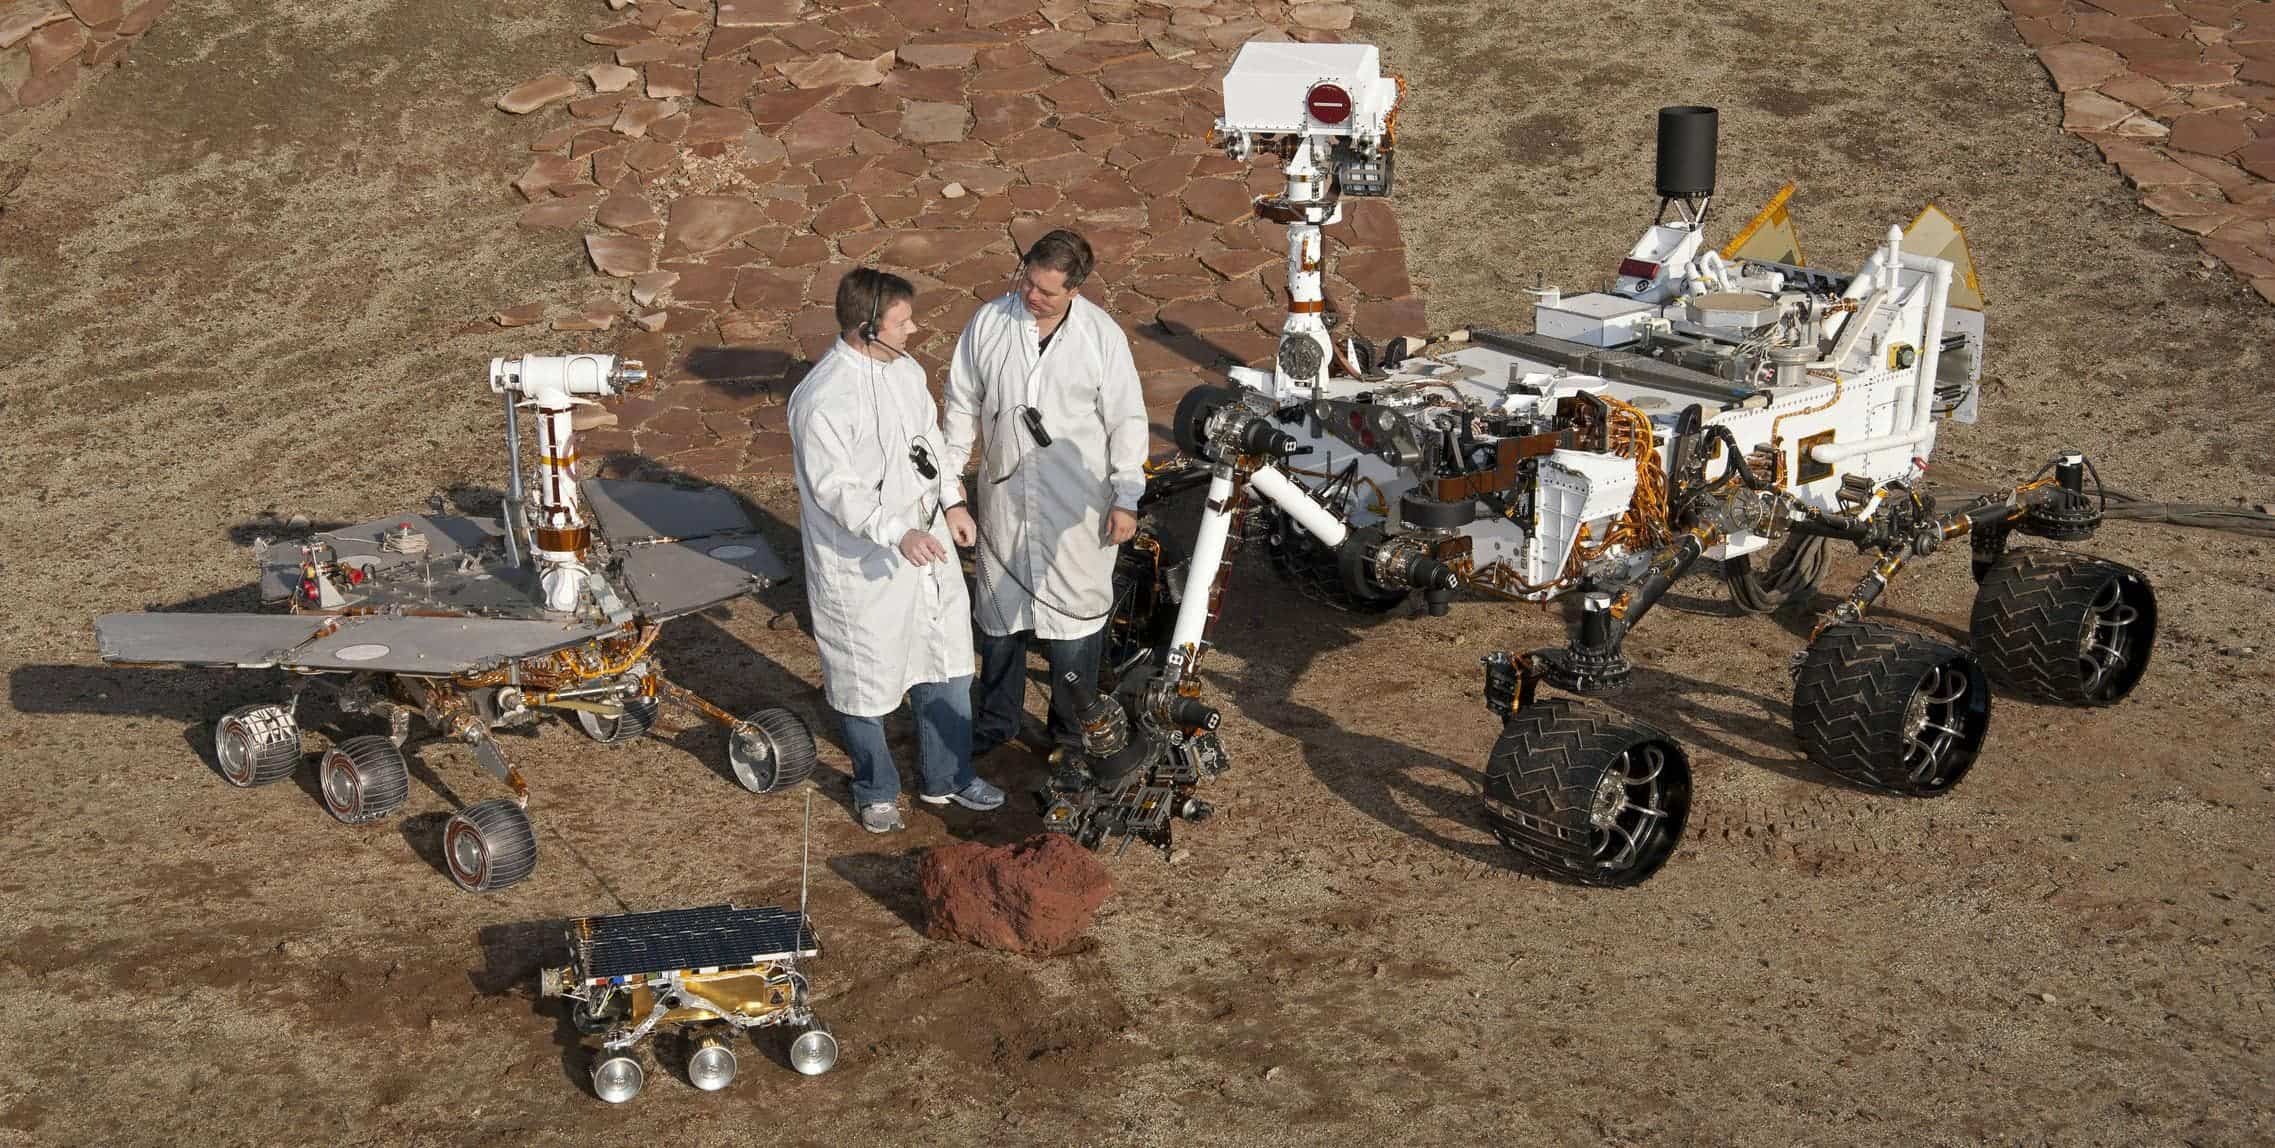 A picture that gives you an estimate of how big Curiosity really is, compared to two scientists and other rovers. Click the picture for full size. Source